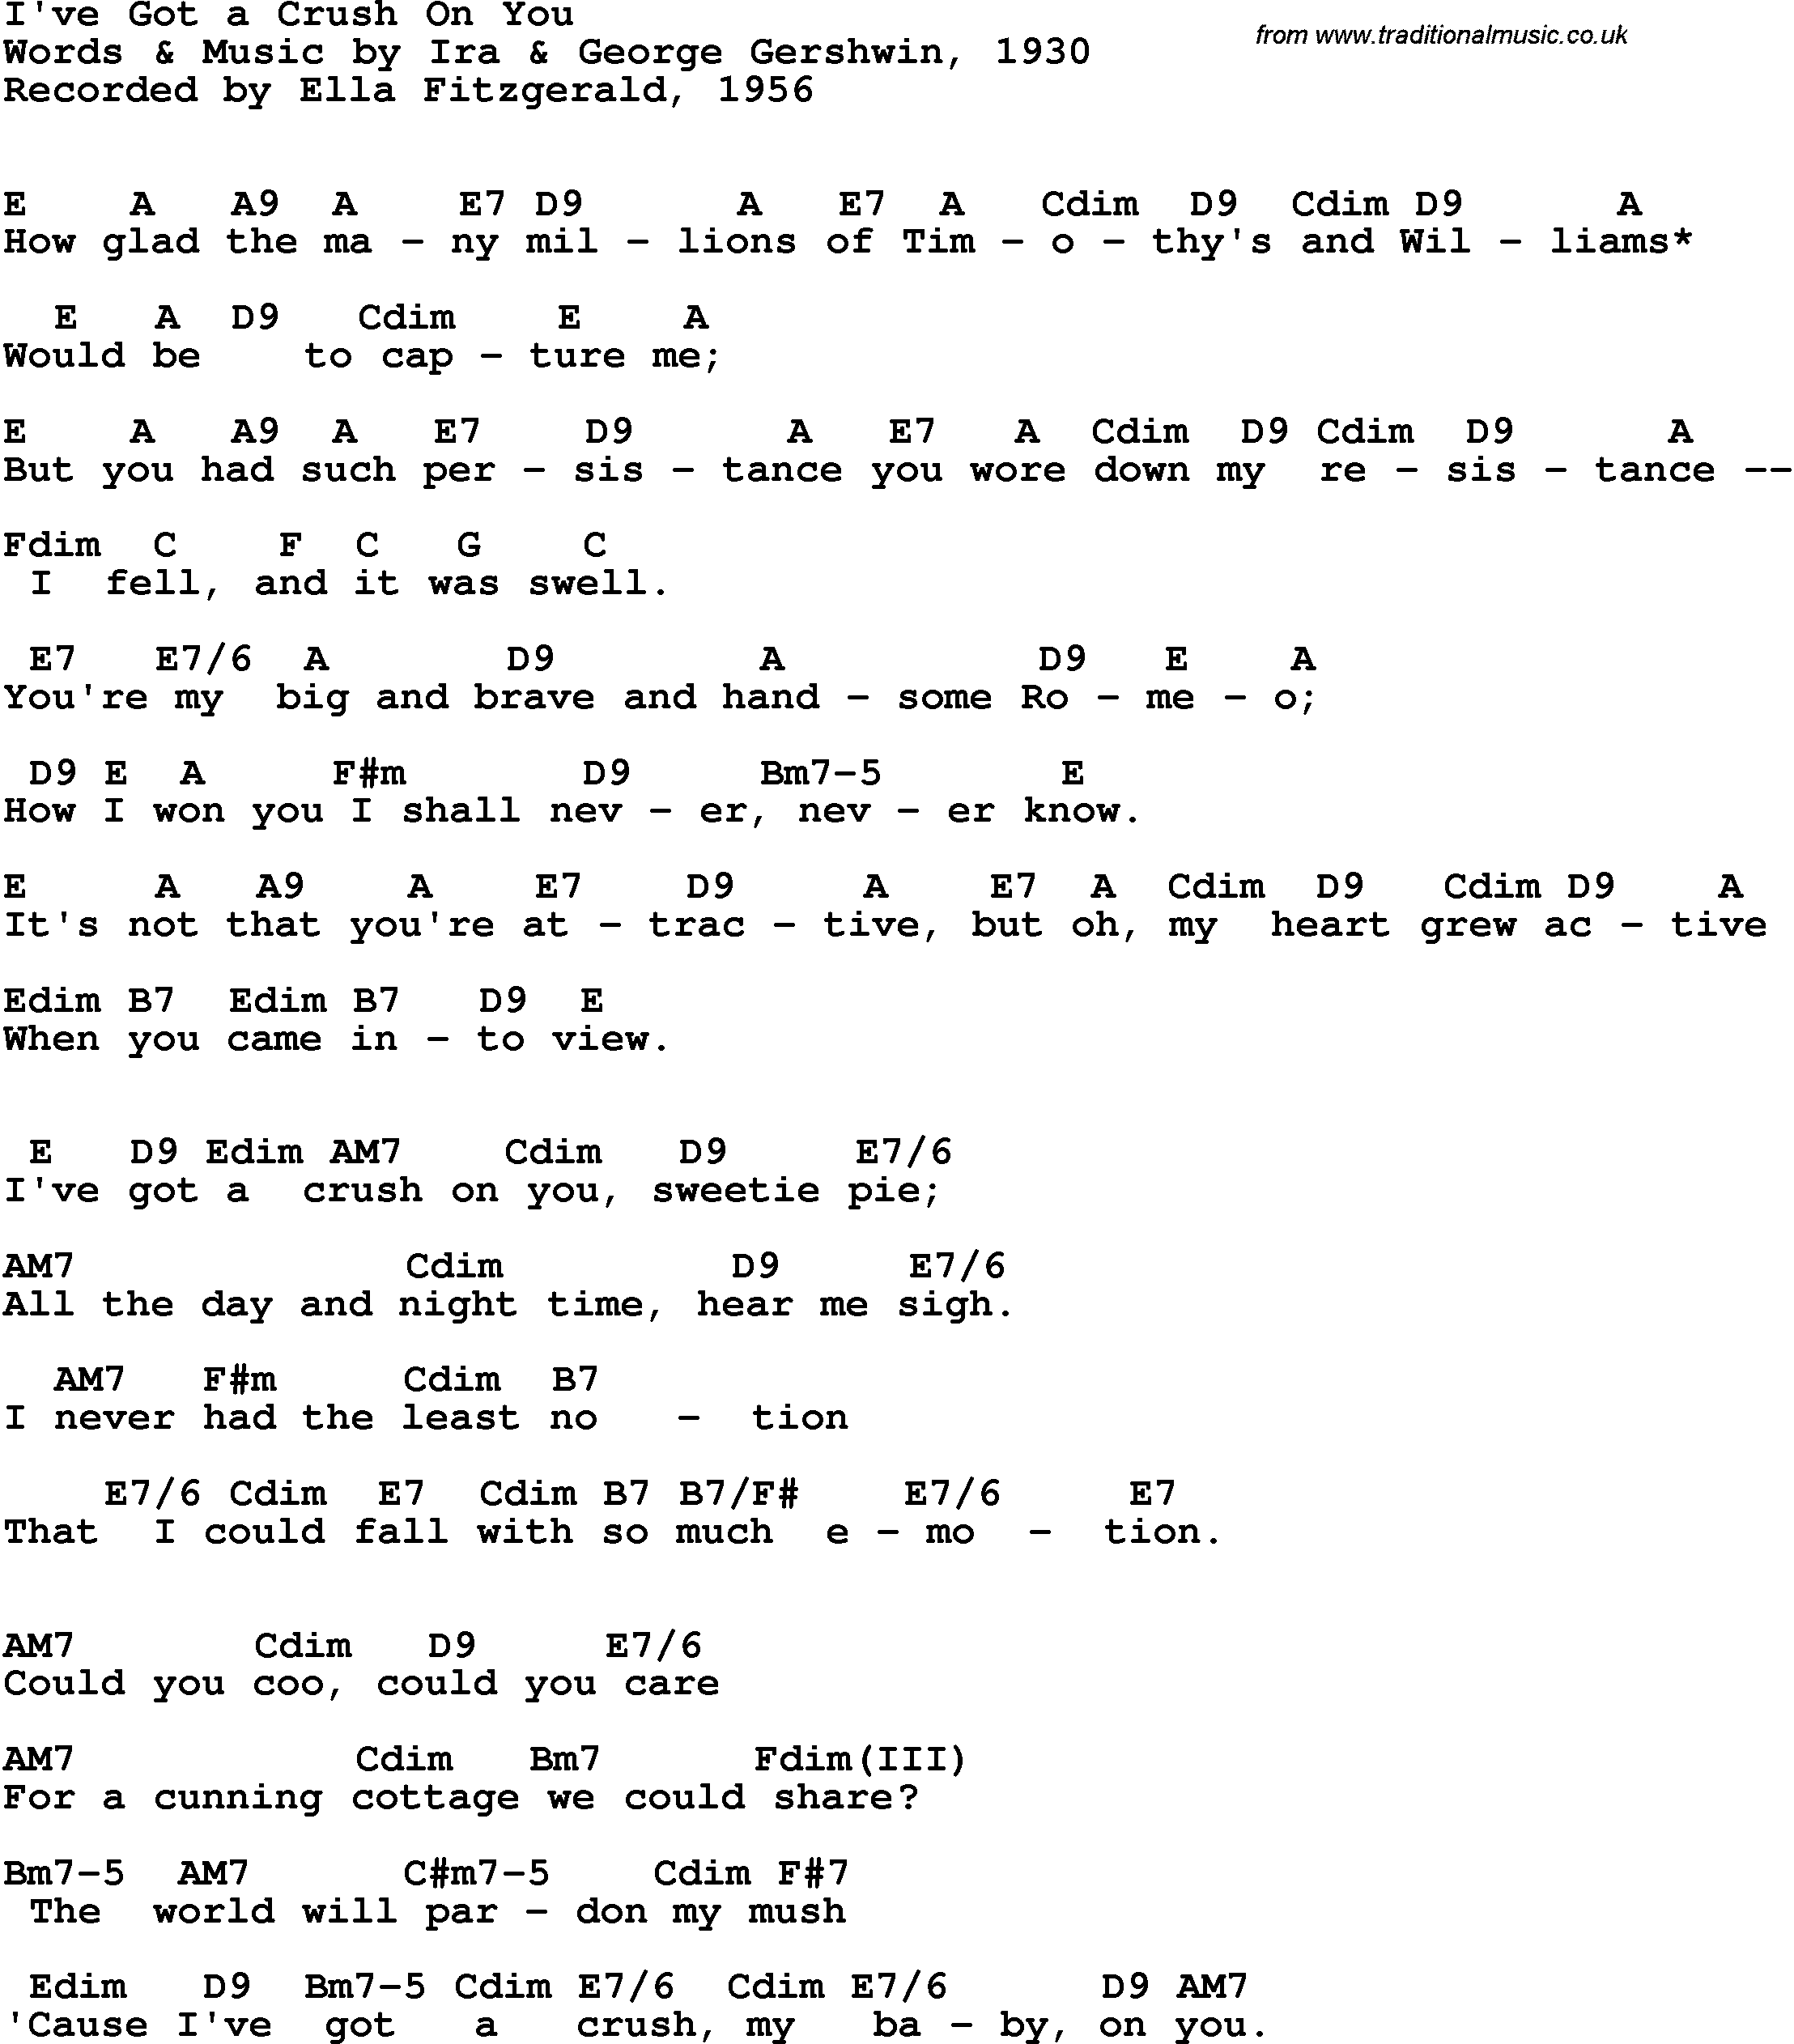 Song Lyrics with guitar chords for I've Got A Crush On You - Ella Fitzgerald, 1956